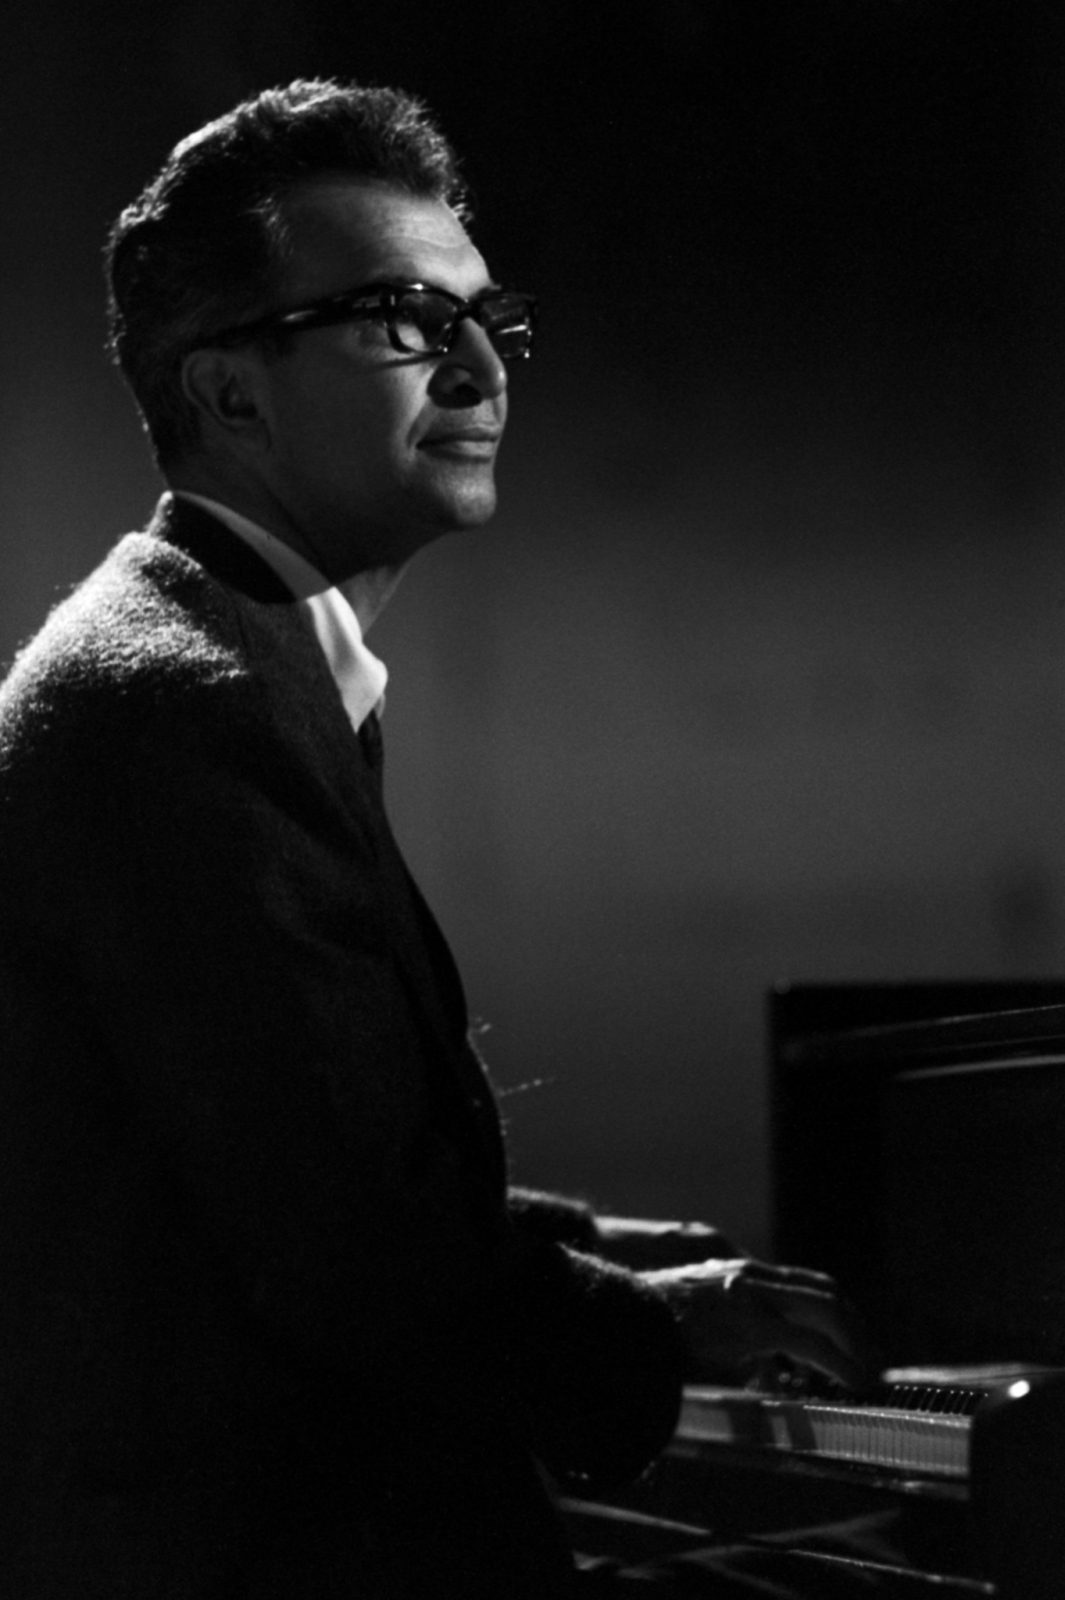 A side profile shot of Dave Brubeck at the piano looking upwards